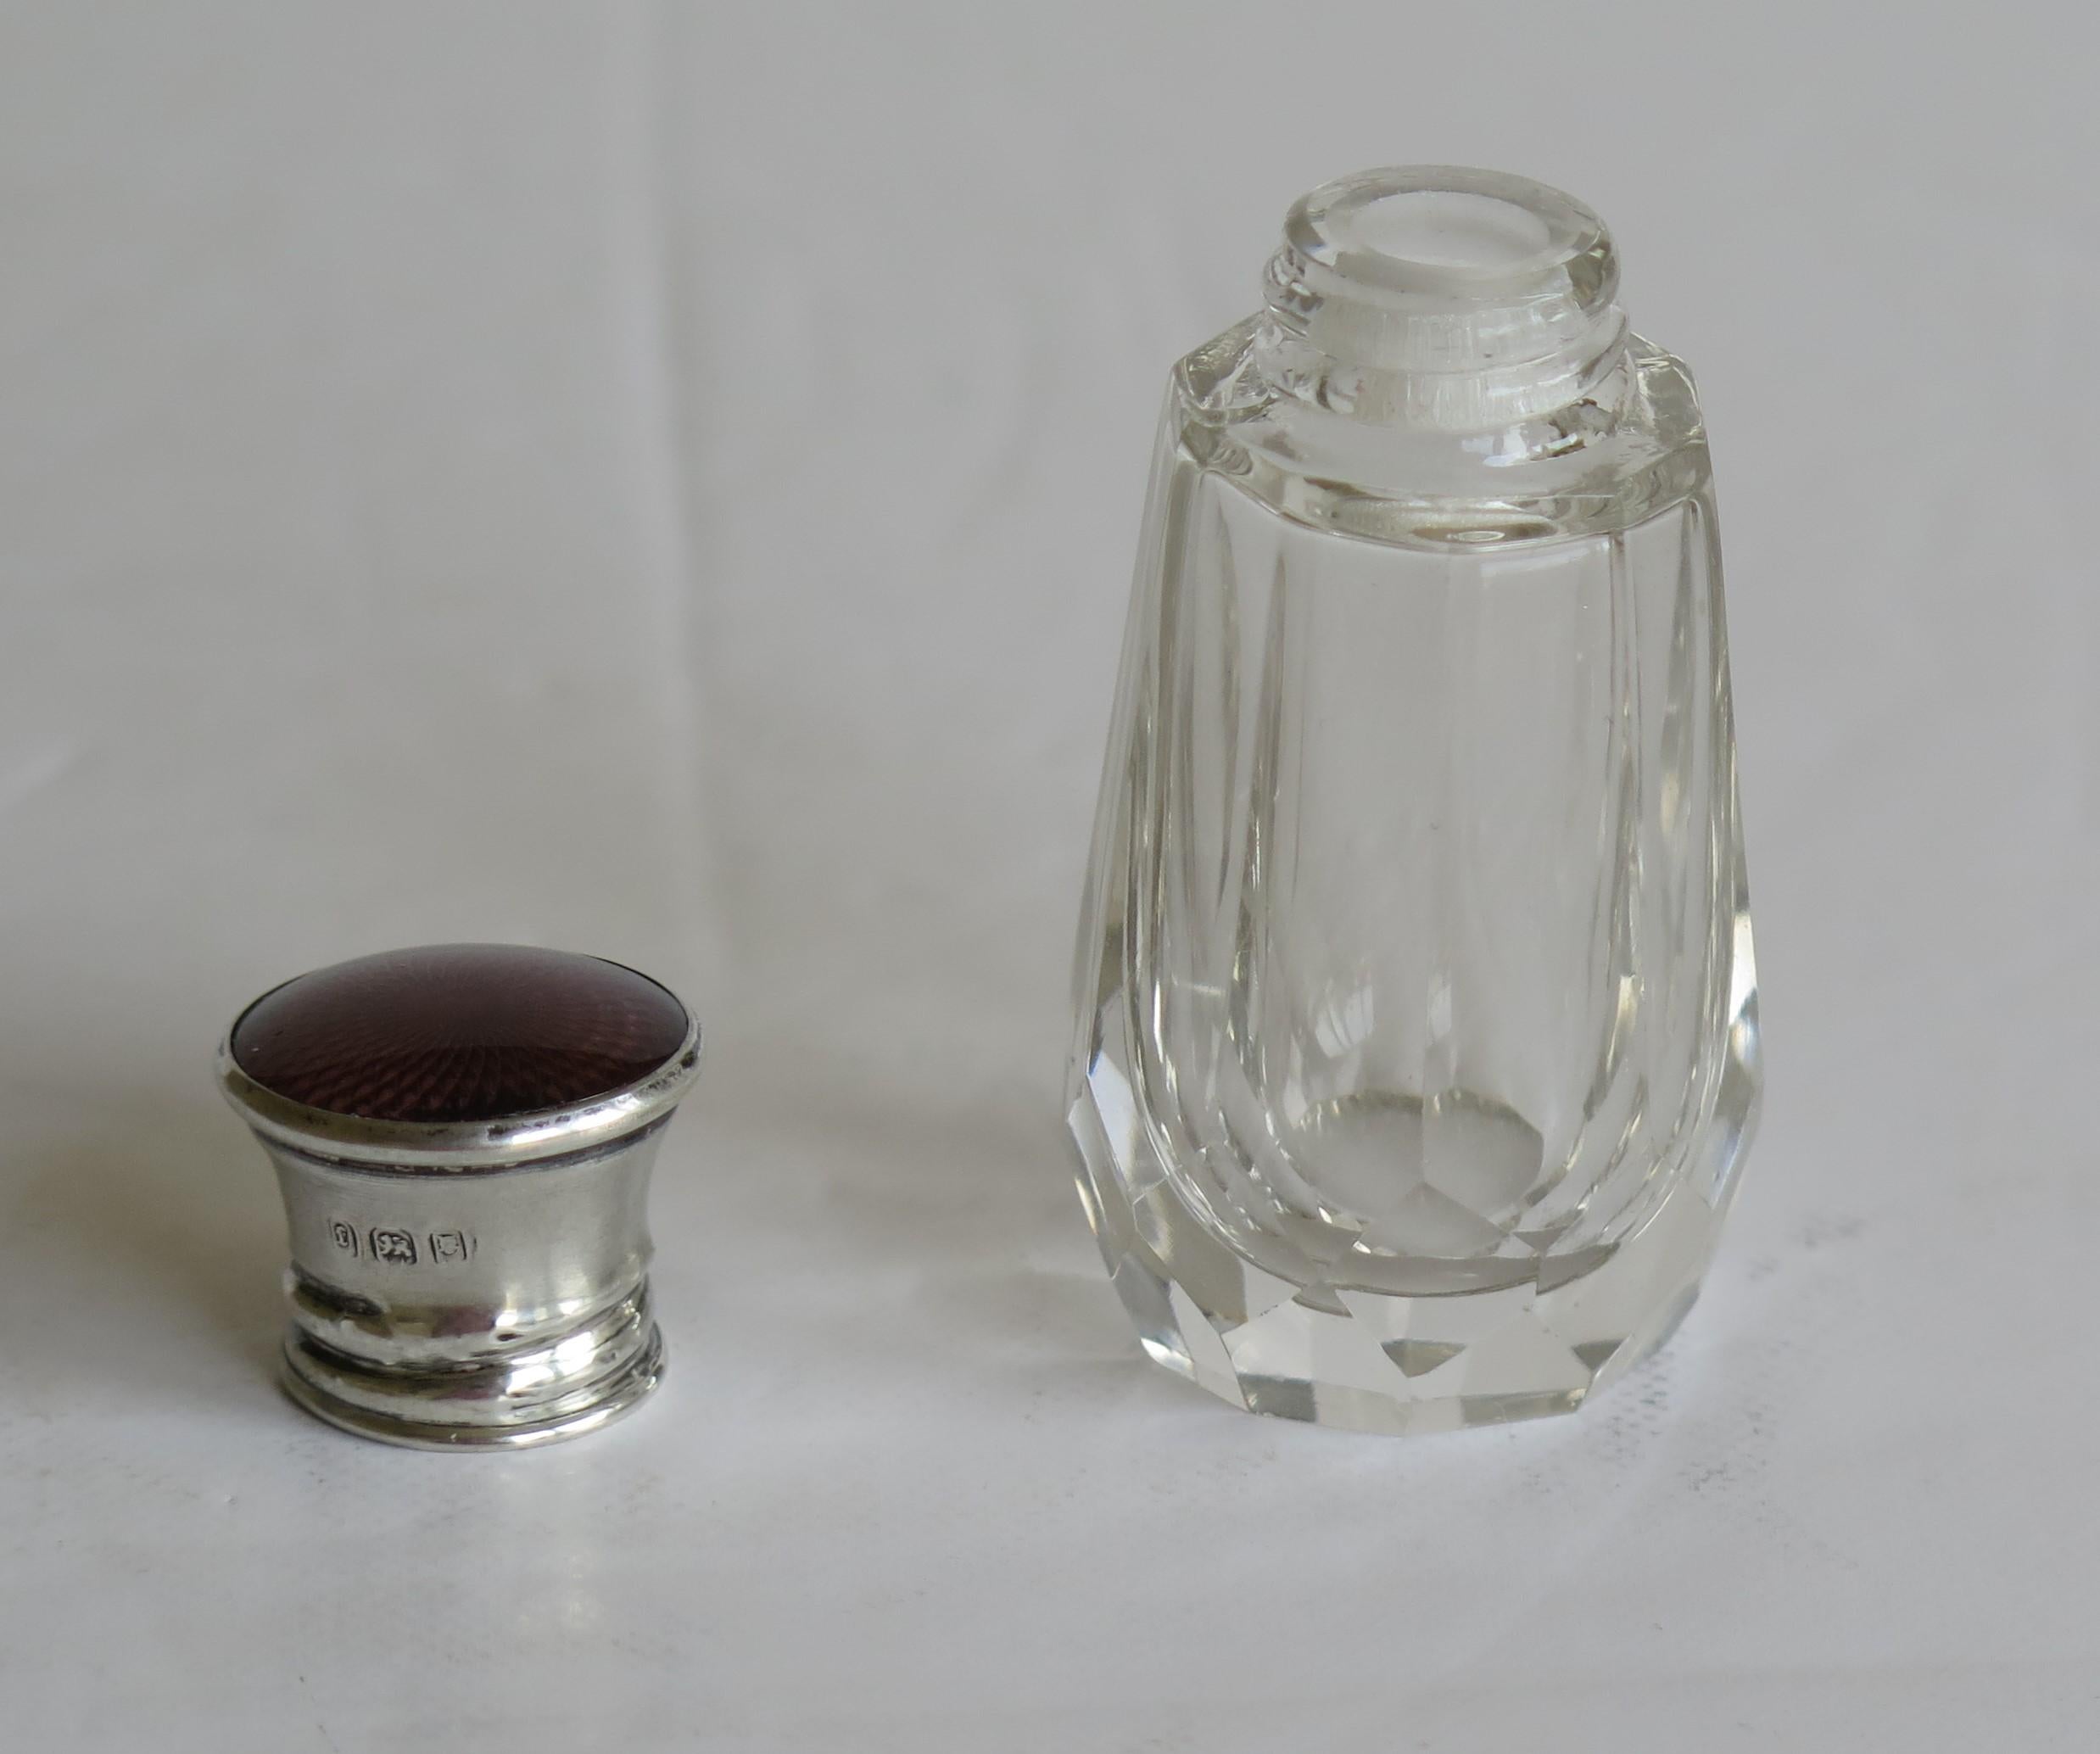 Burgundy Guilloche & Silver Topped Cut Glass Scent or Perfume Bottle London 1921 For Sale 3